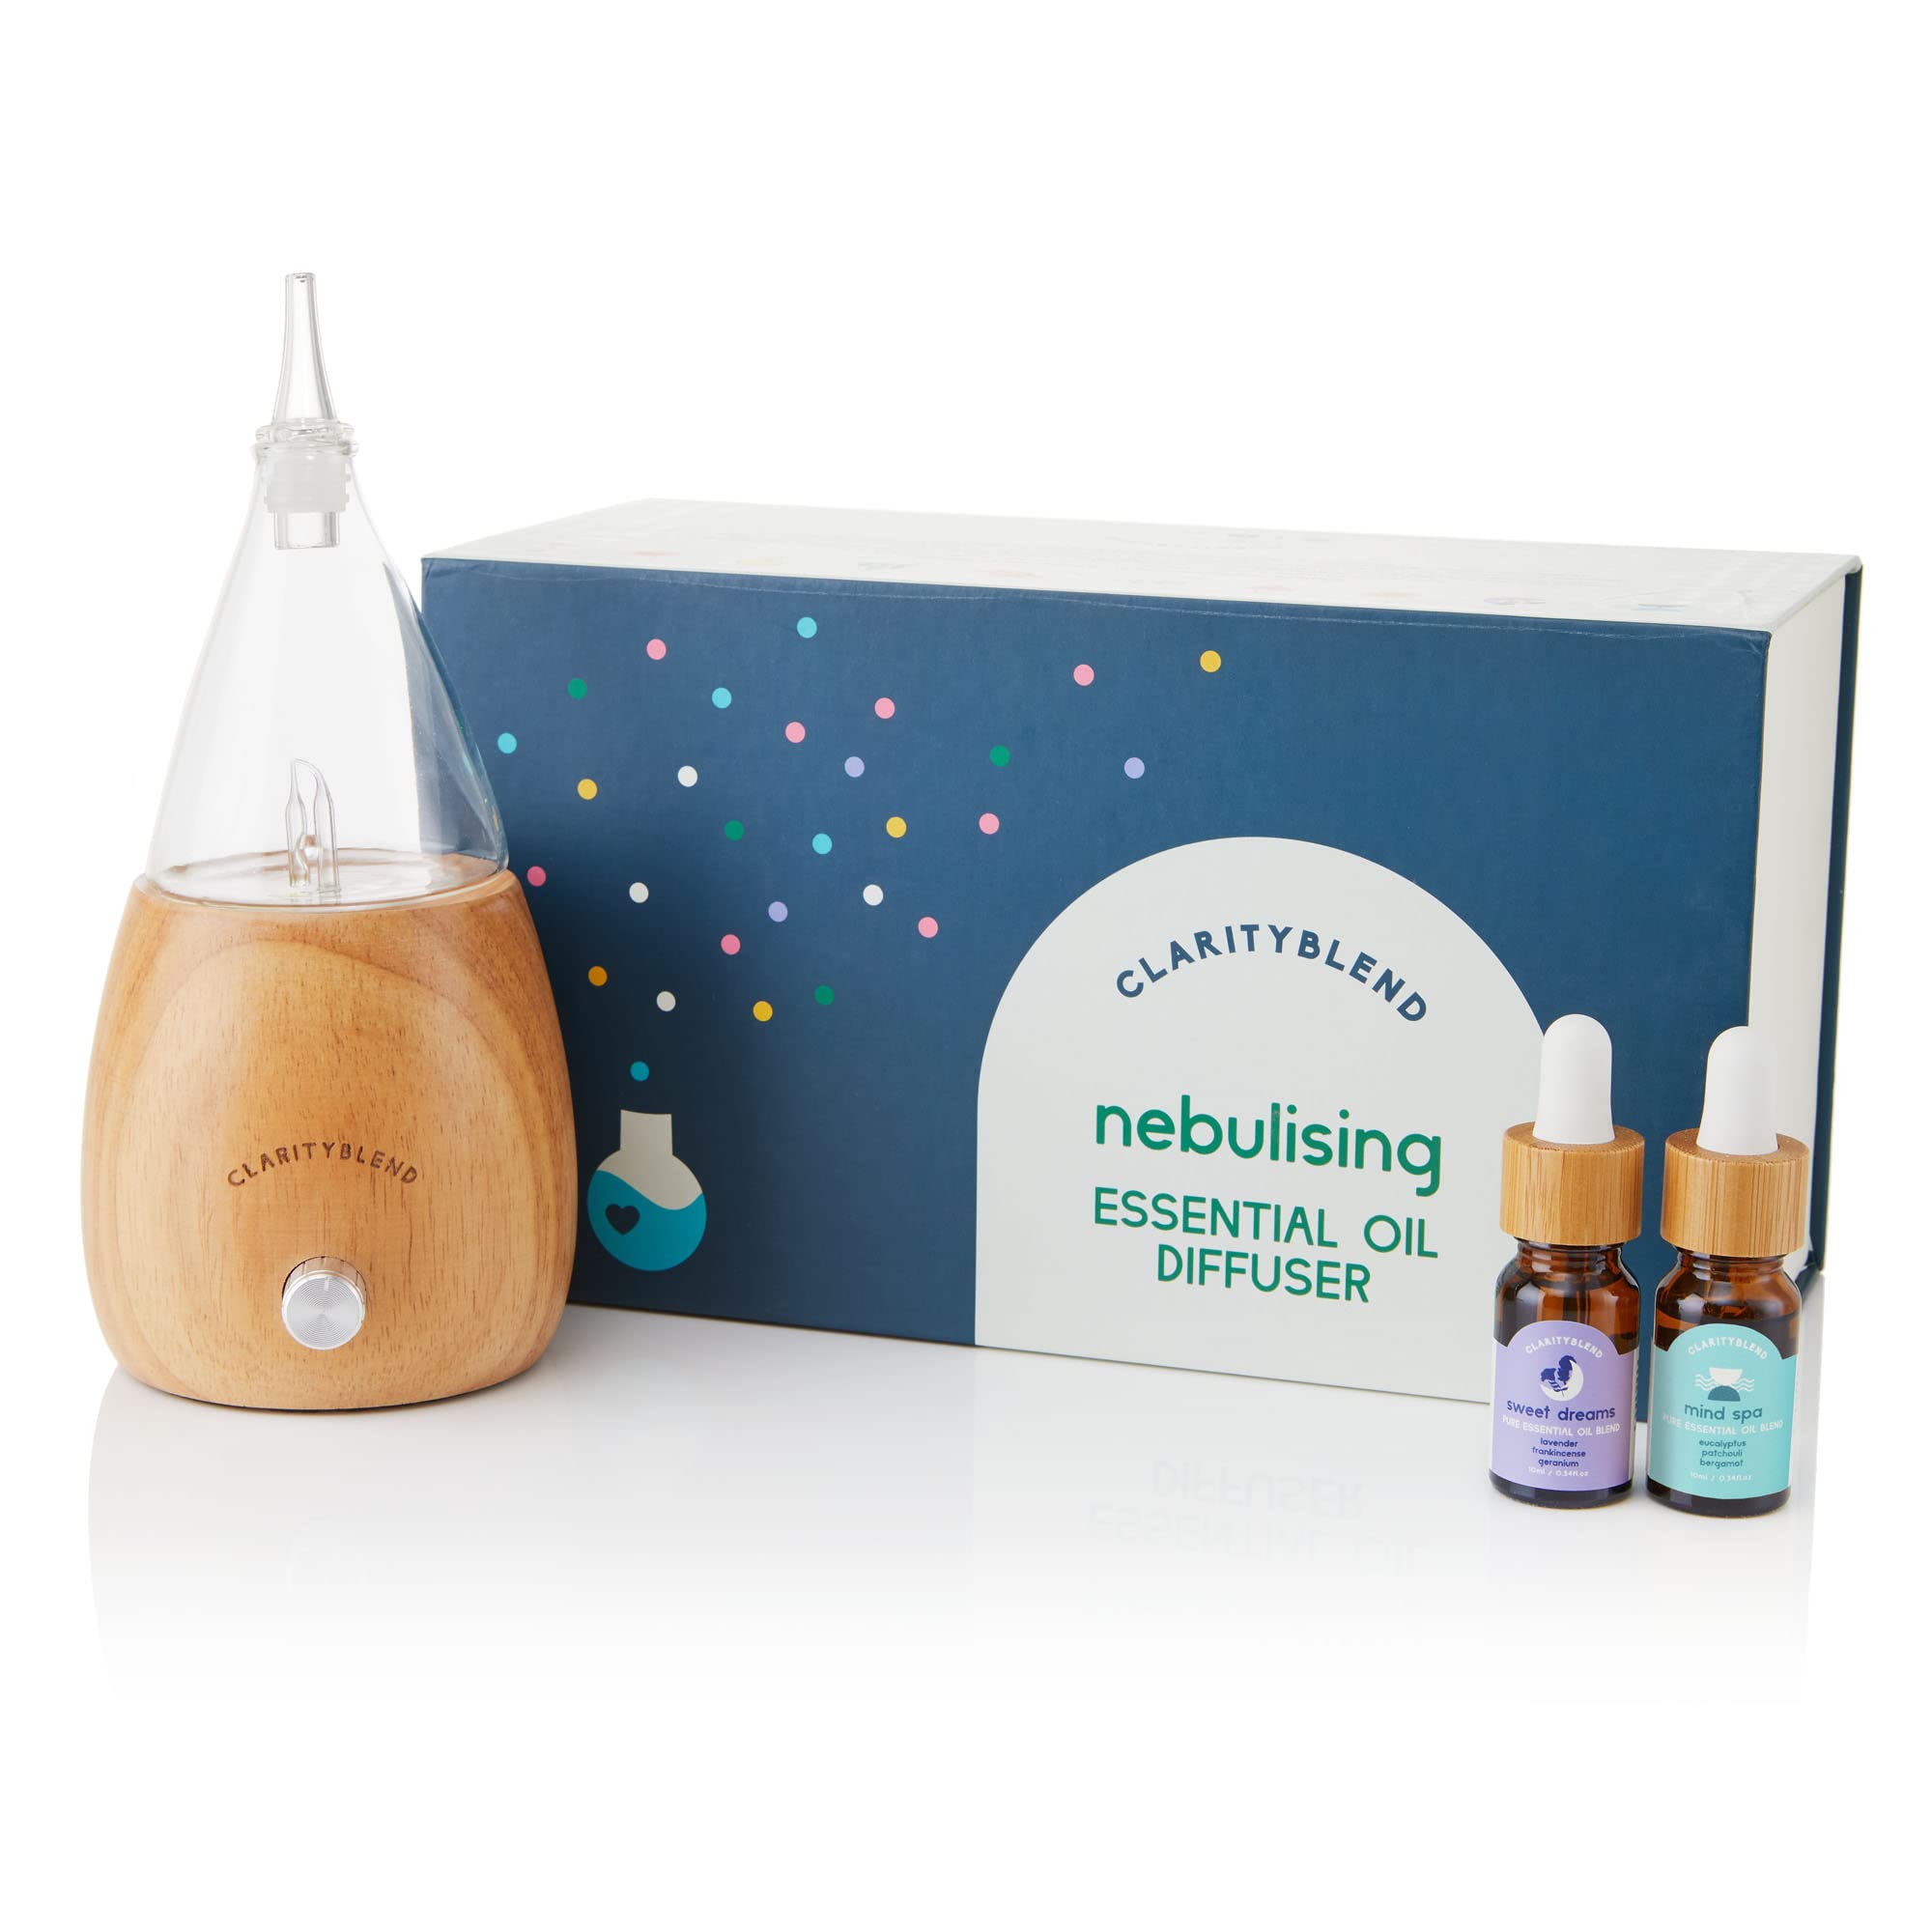 Aromatherapy diffuser with calming essential oils